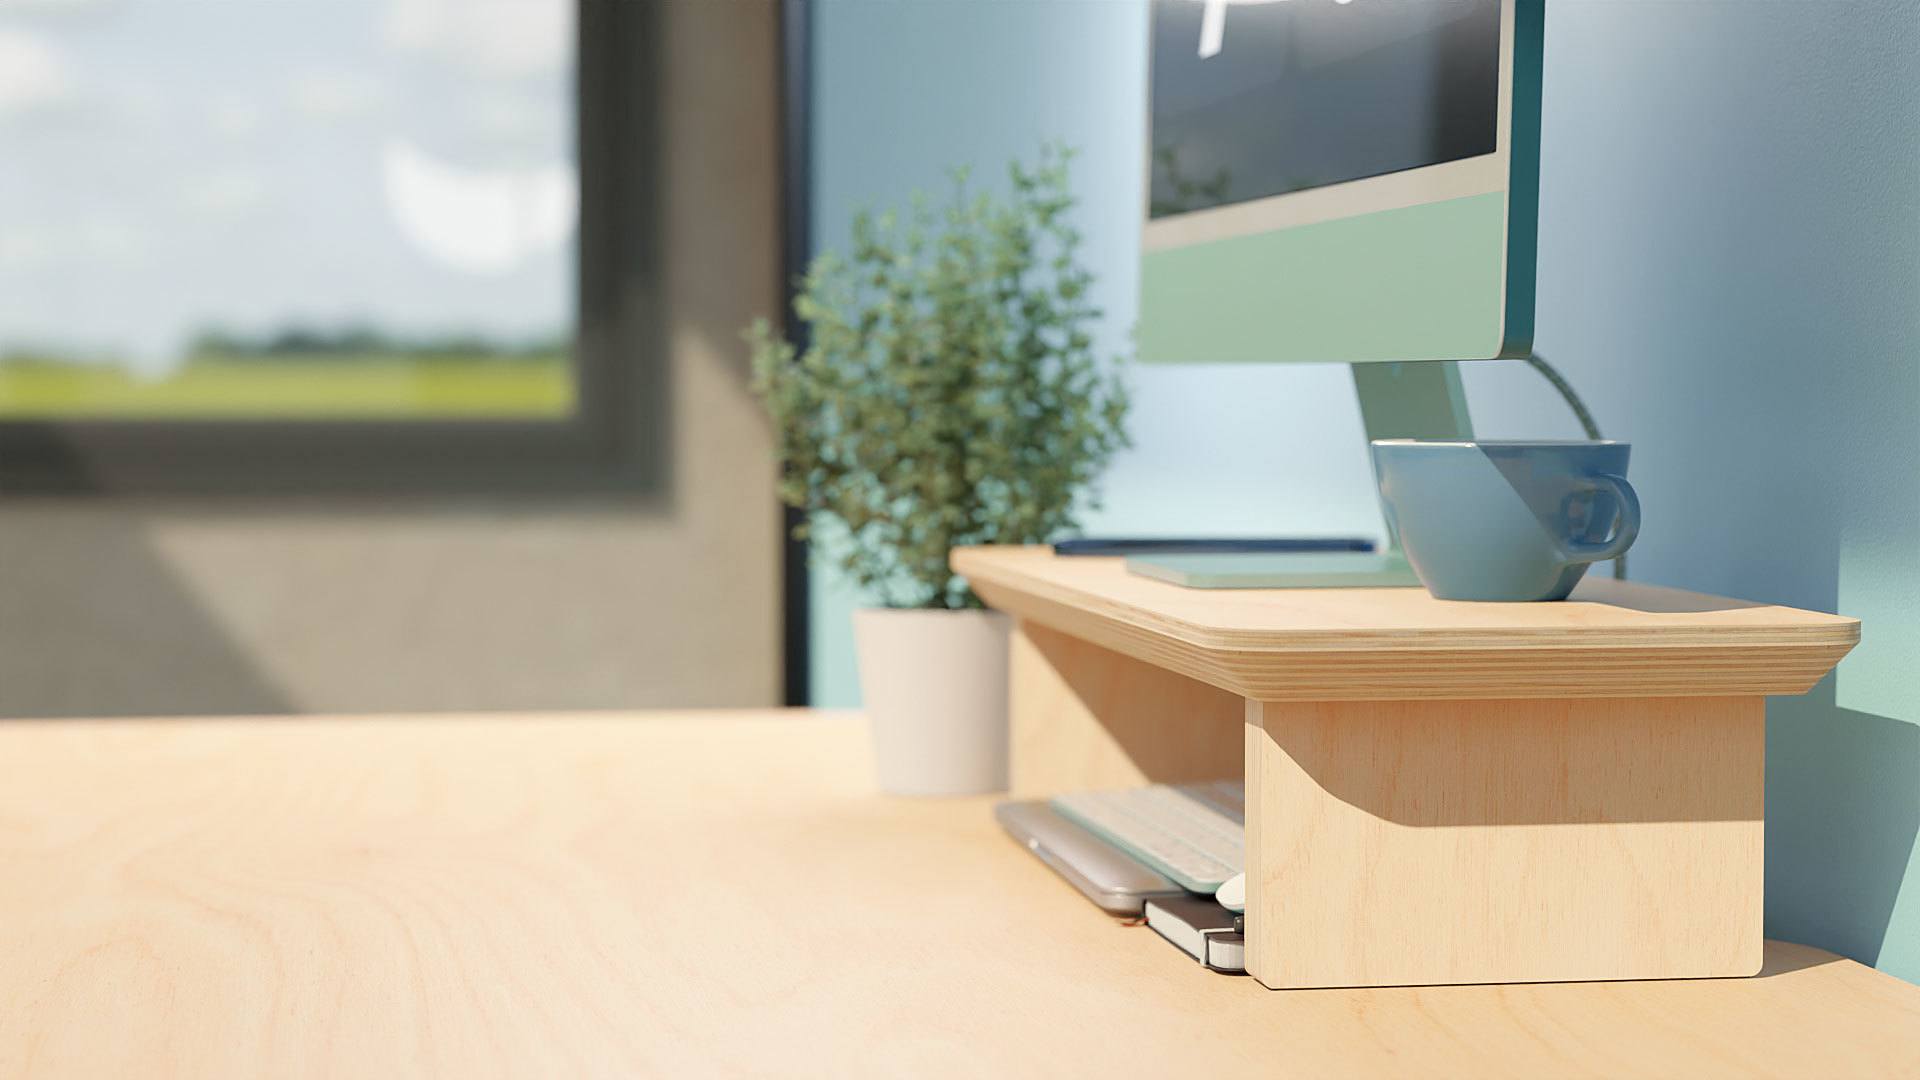 The Ecosium medium size sustainable timber desk shelf against a blue wall with a green iMac on top, and a Macbook, keyboard and mouse stored underneath